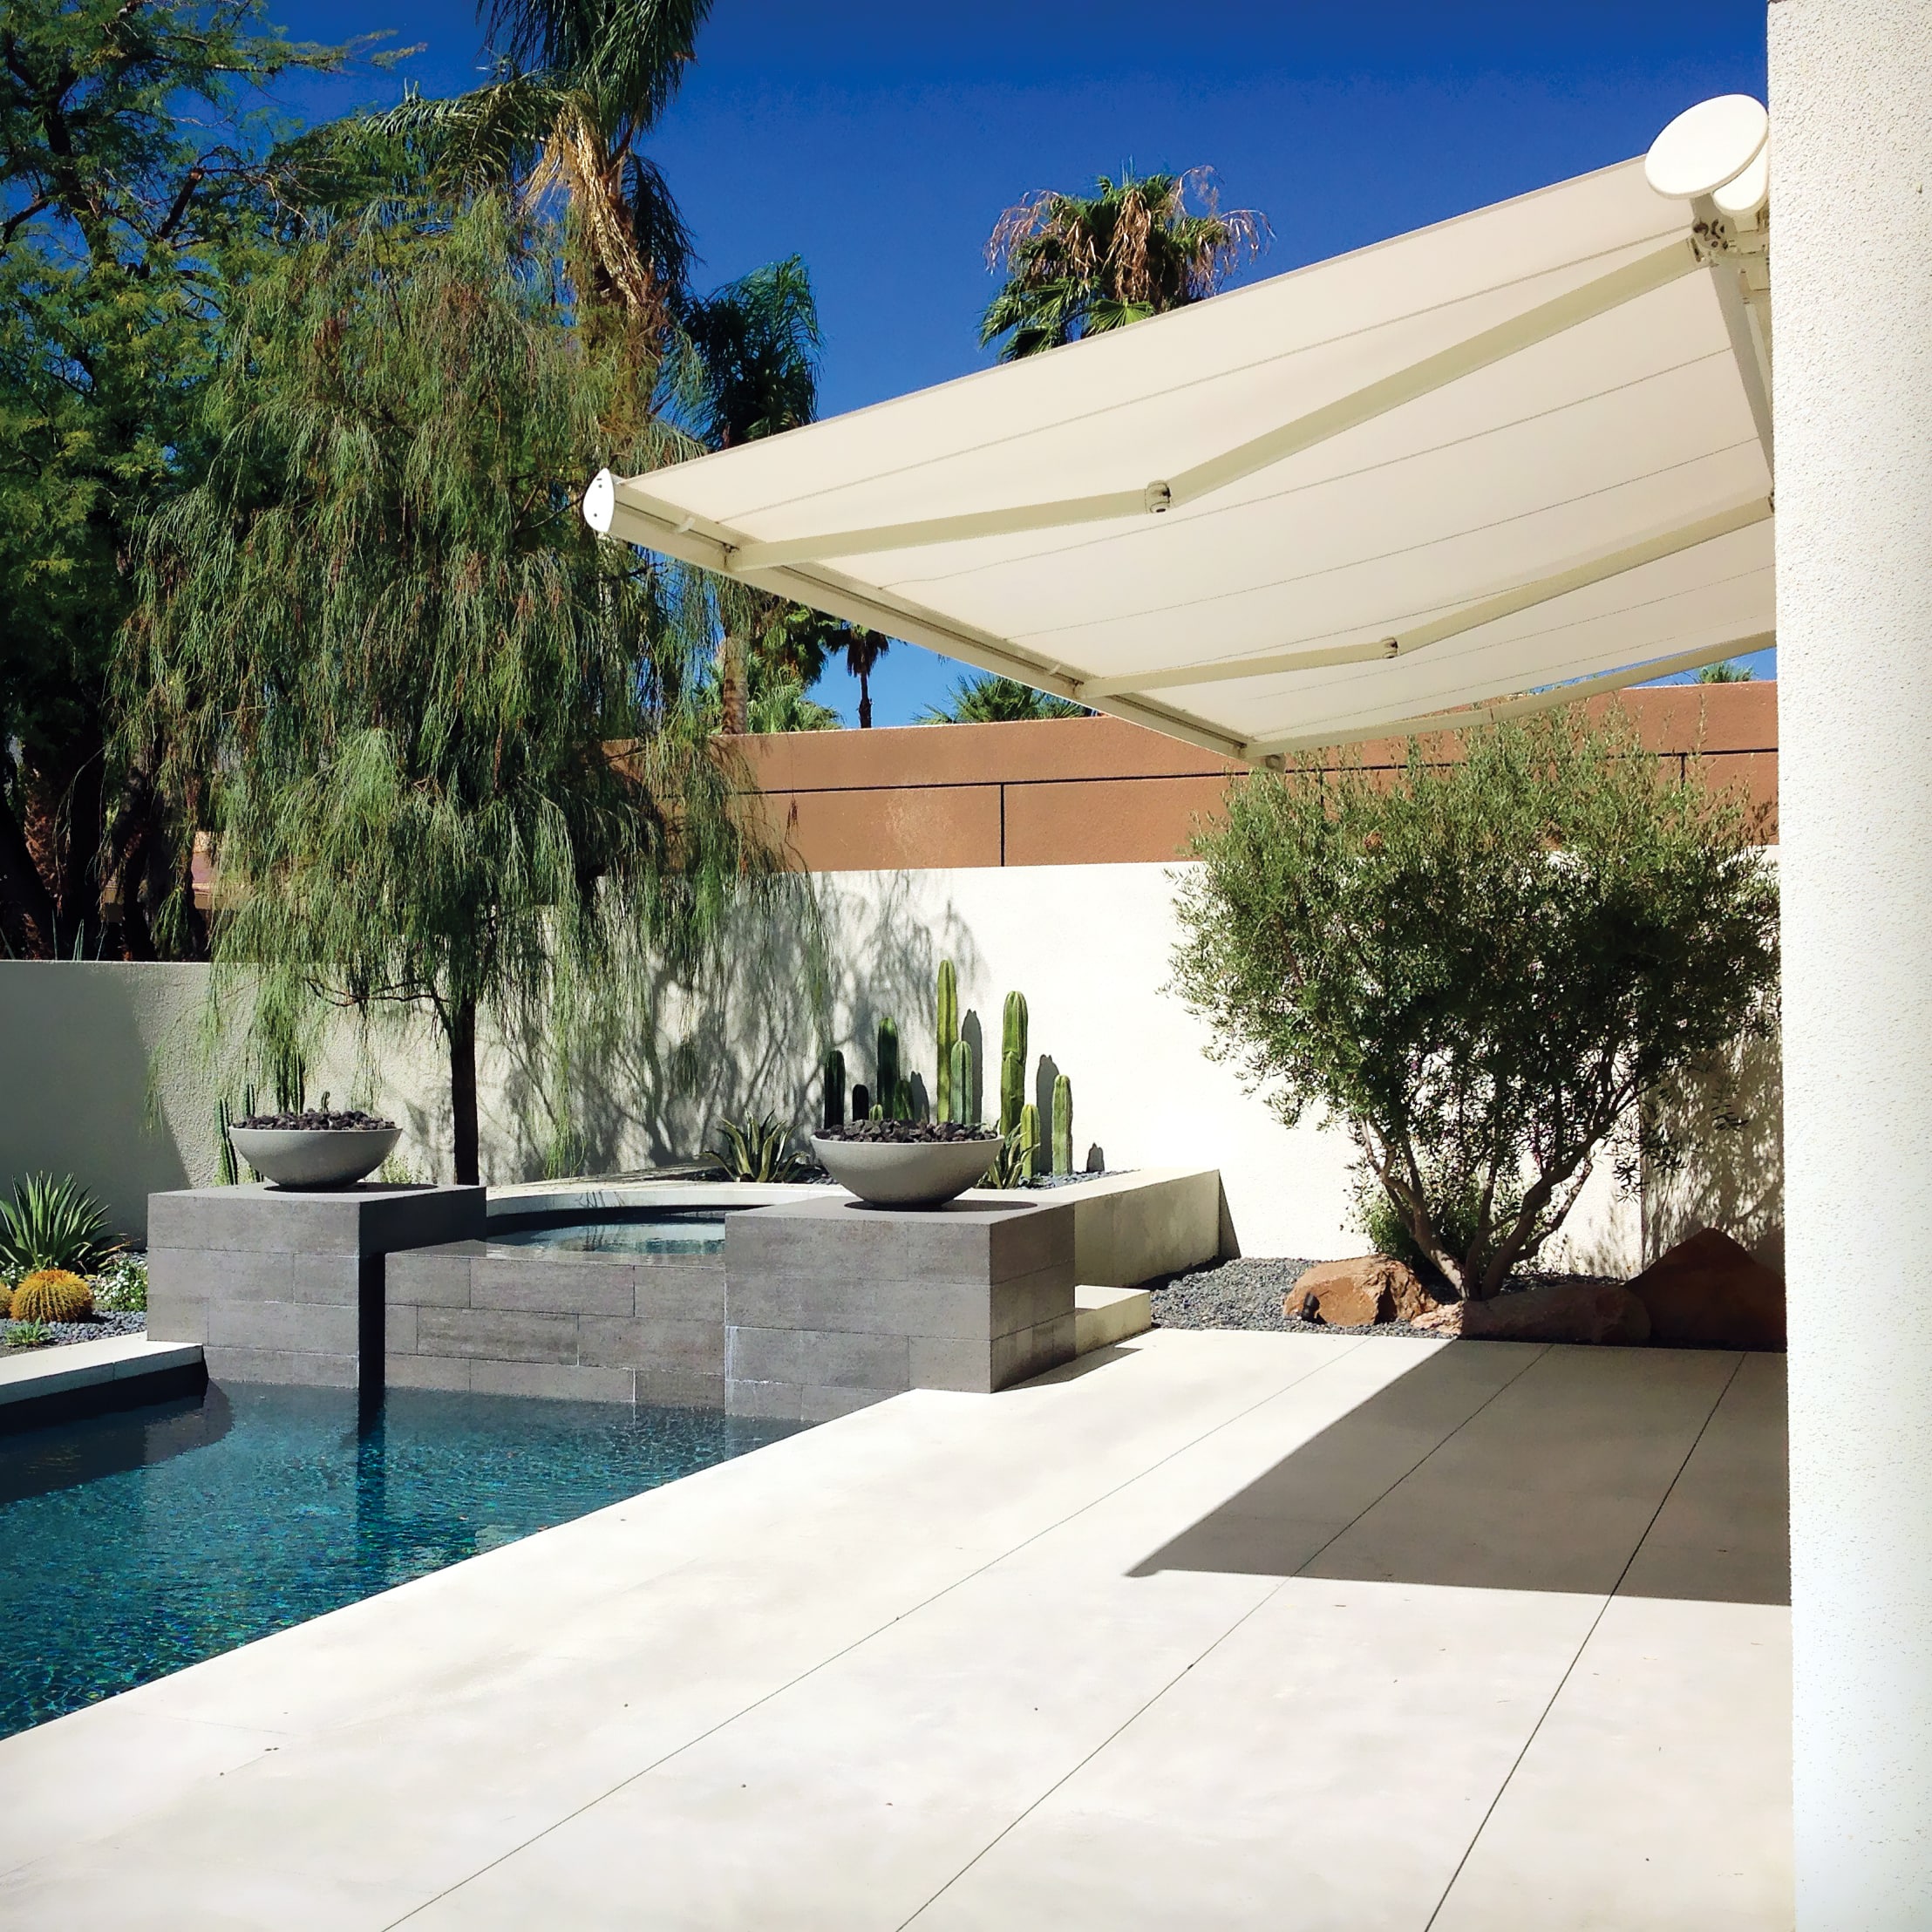 Motorized patio awning by a pool